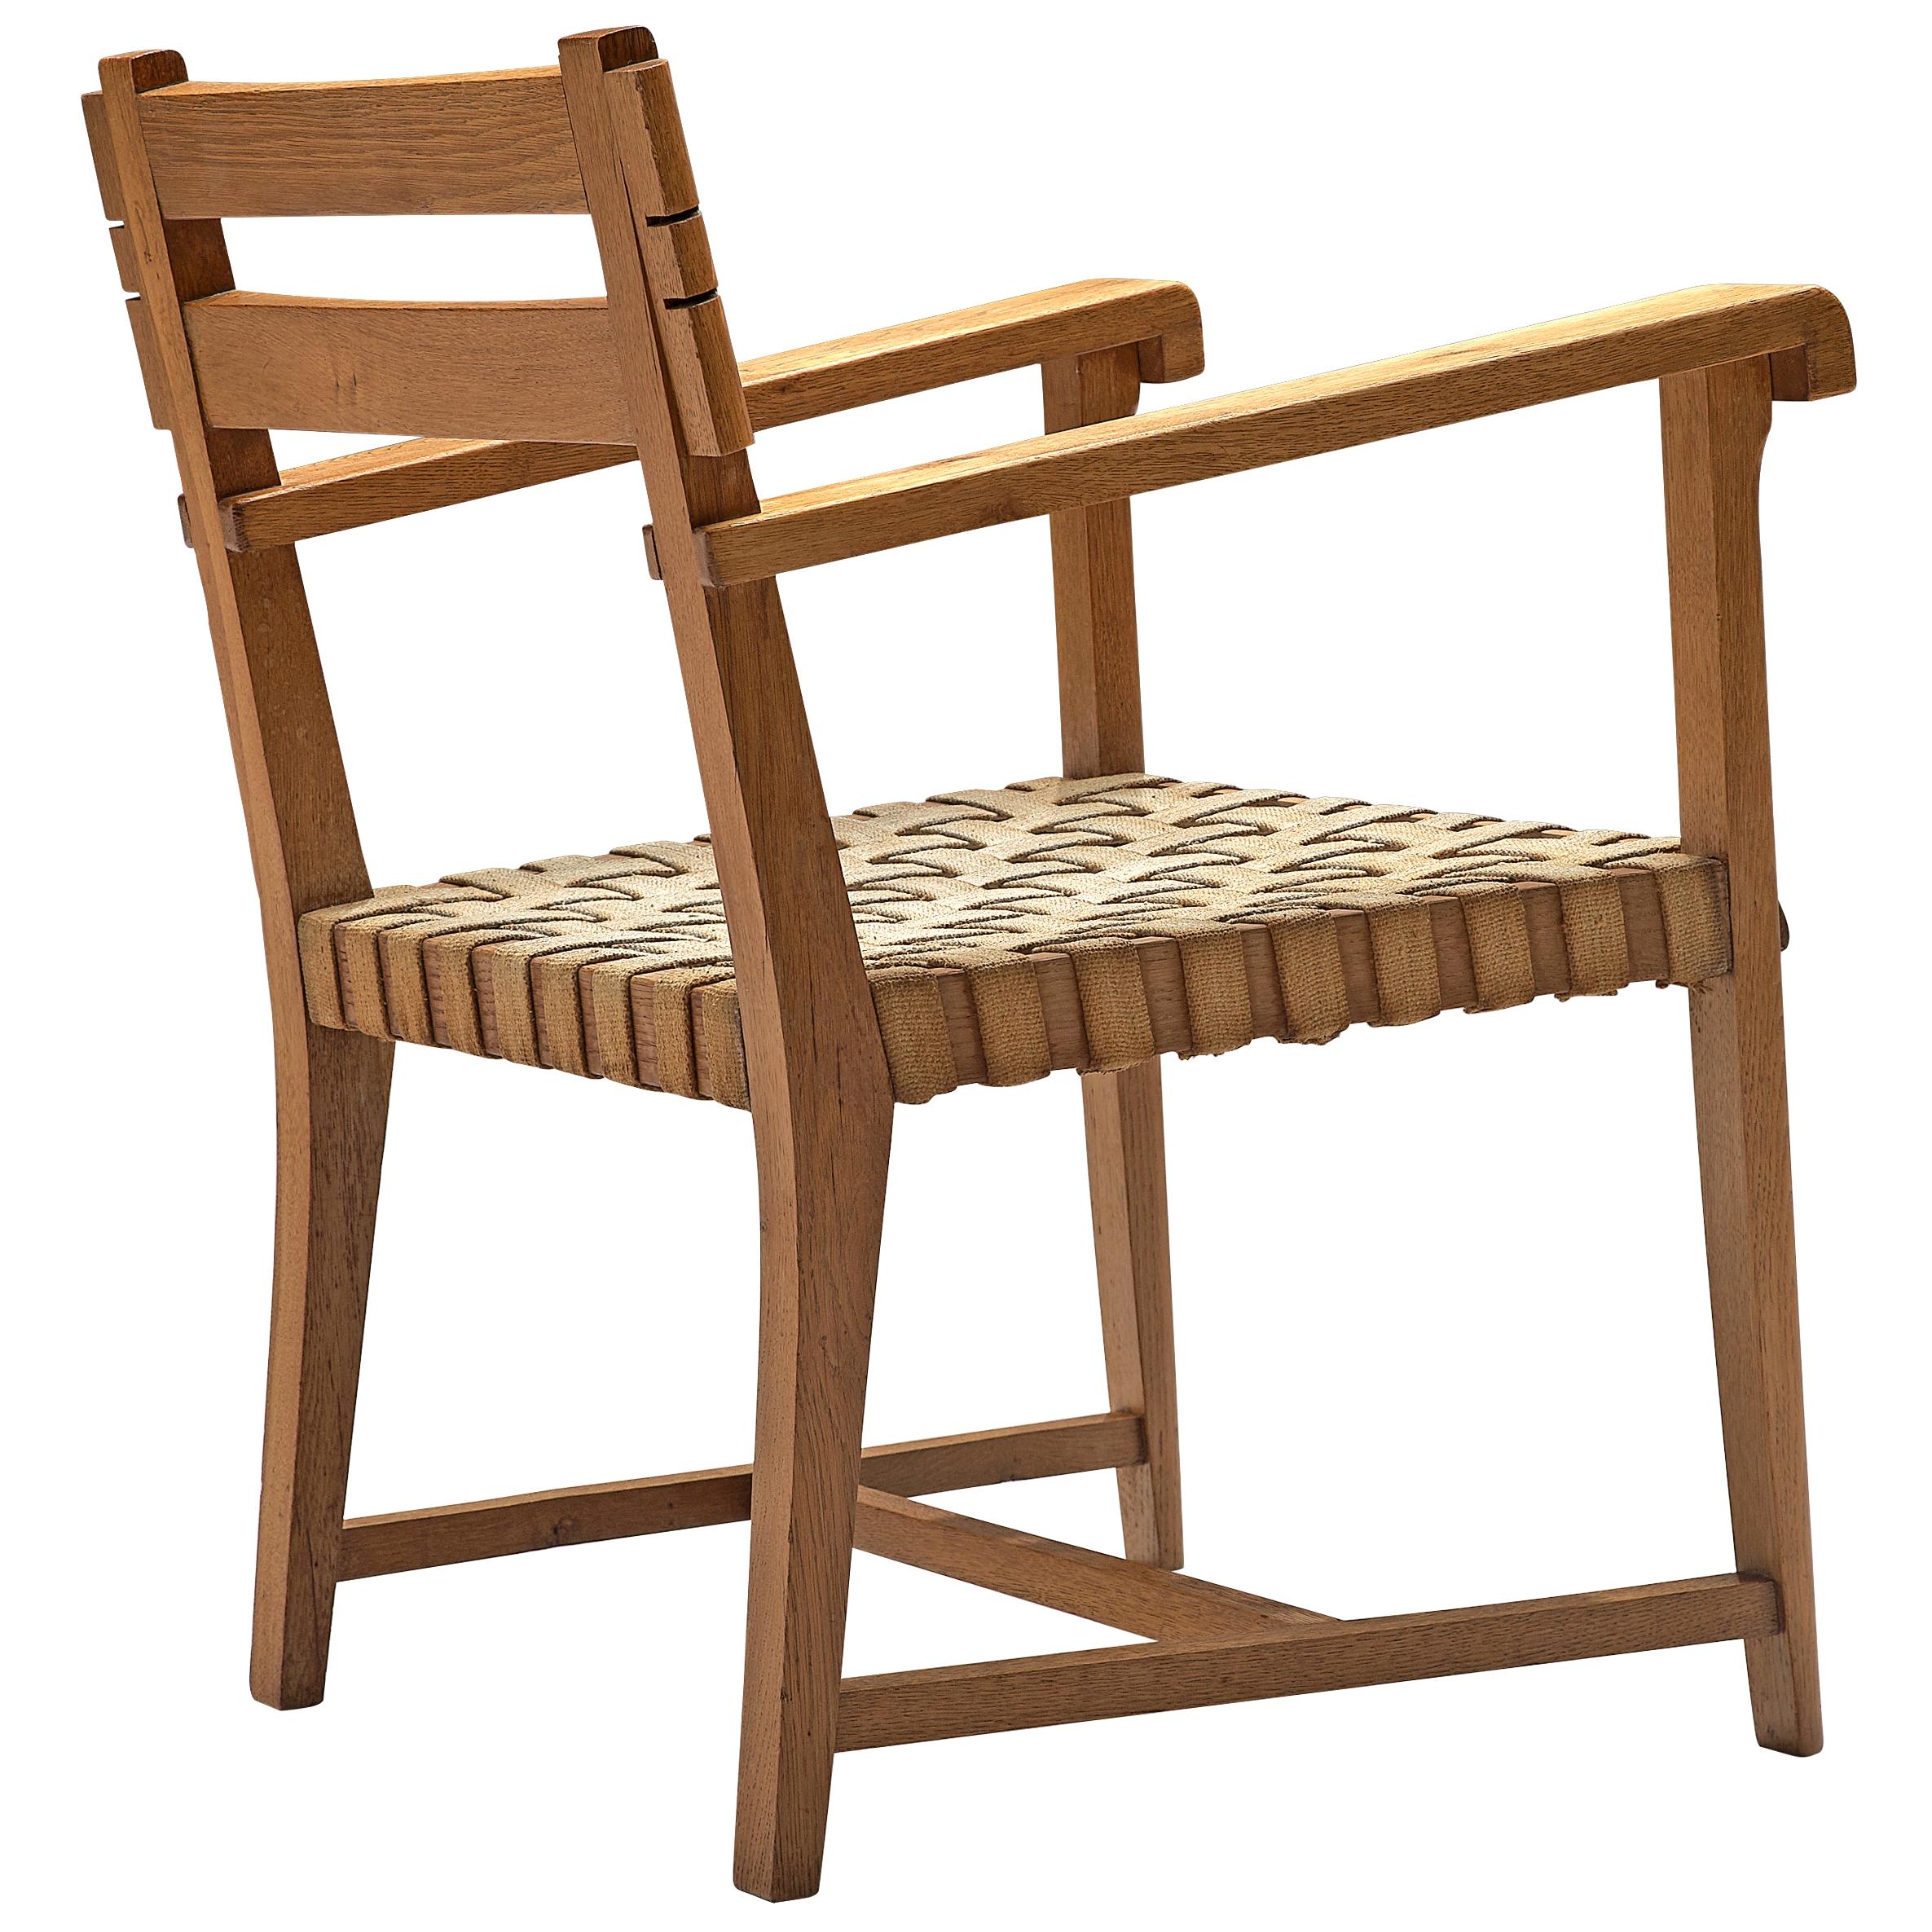 French Art Deco Armchair in Solid Oak with Woven Seat